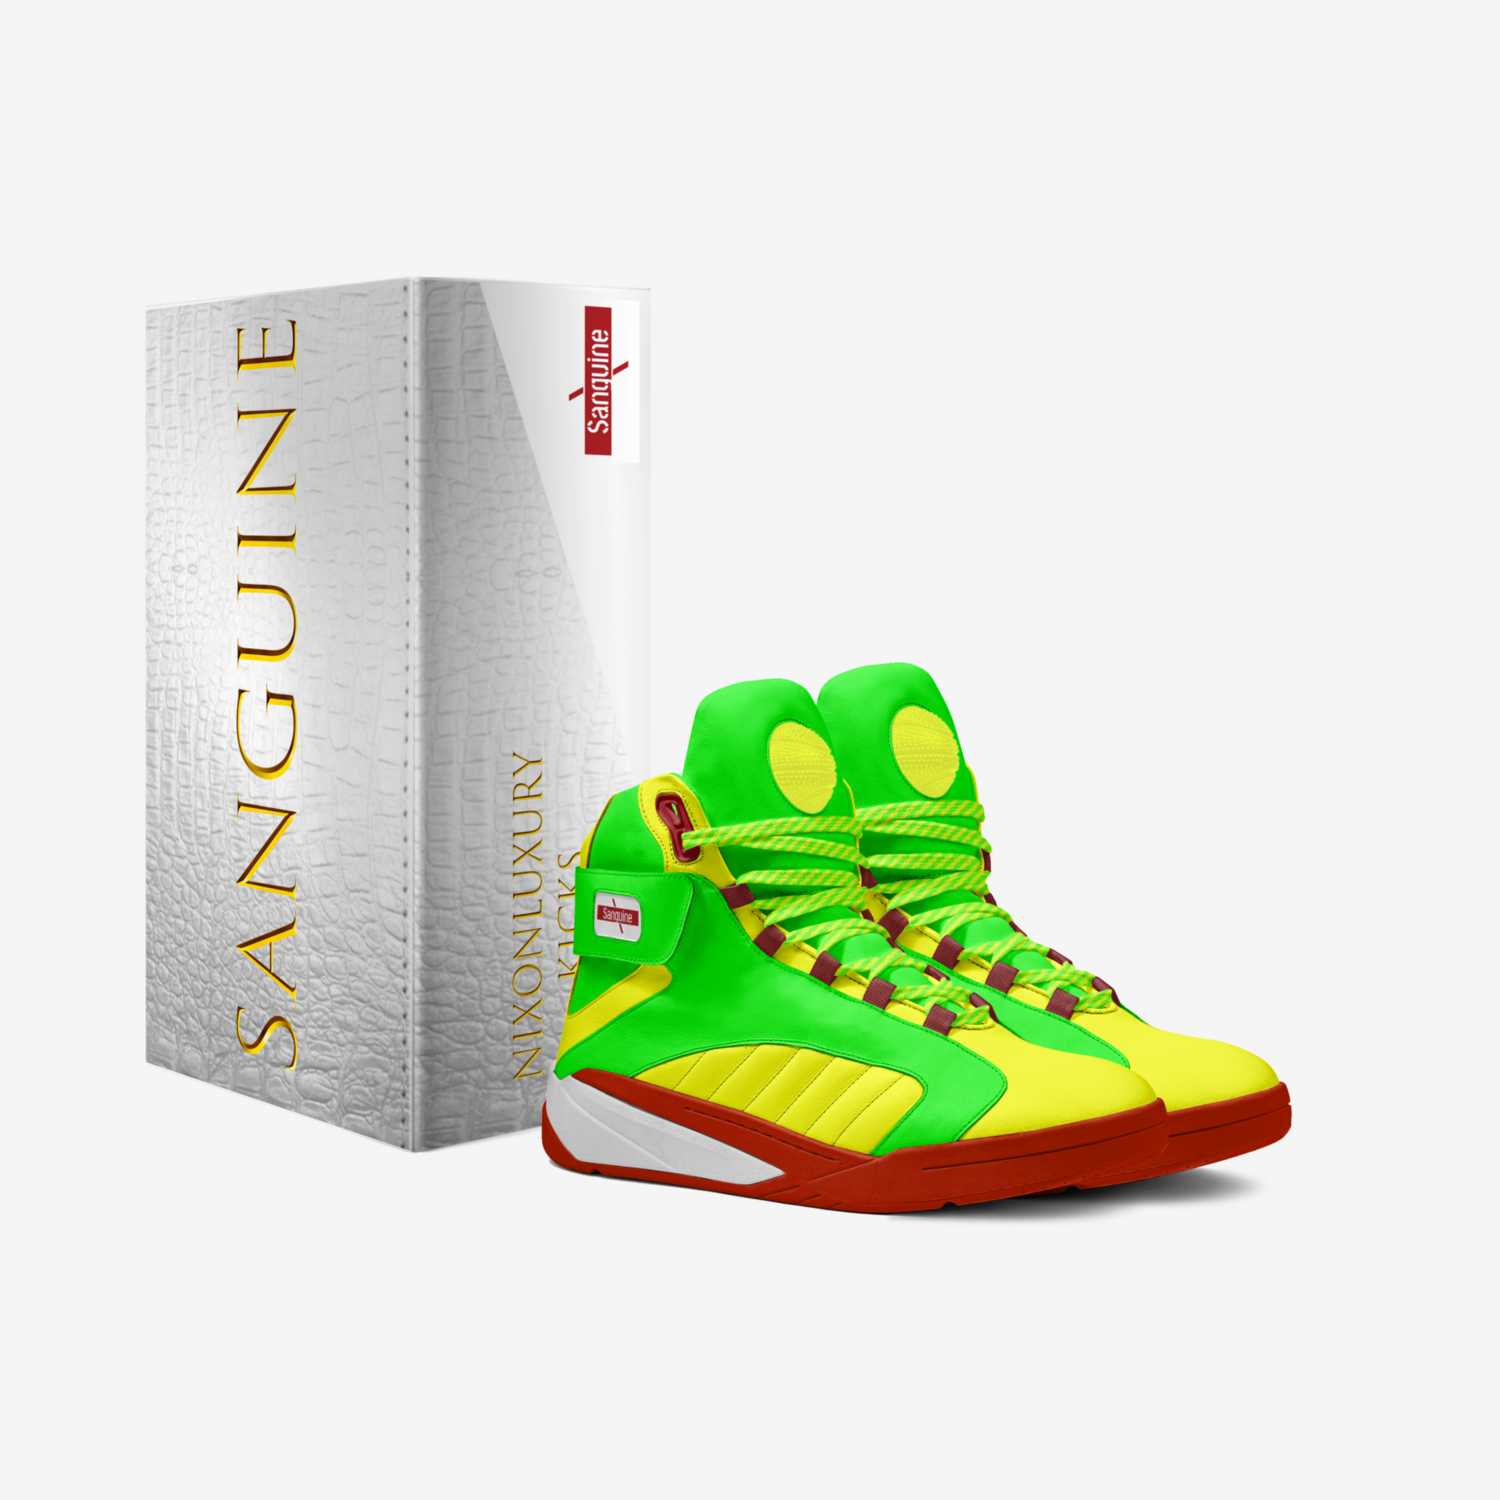 Sanguine custom made in Italy shoes by Ray Kolinski | Box view